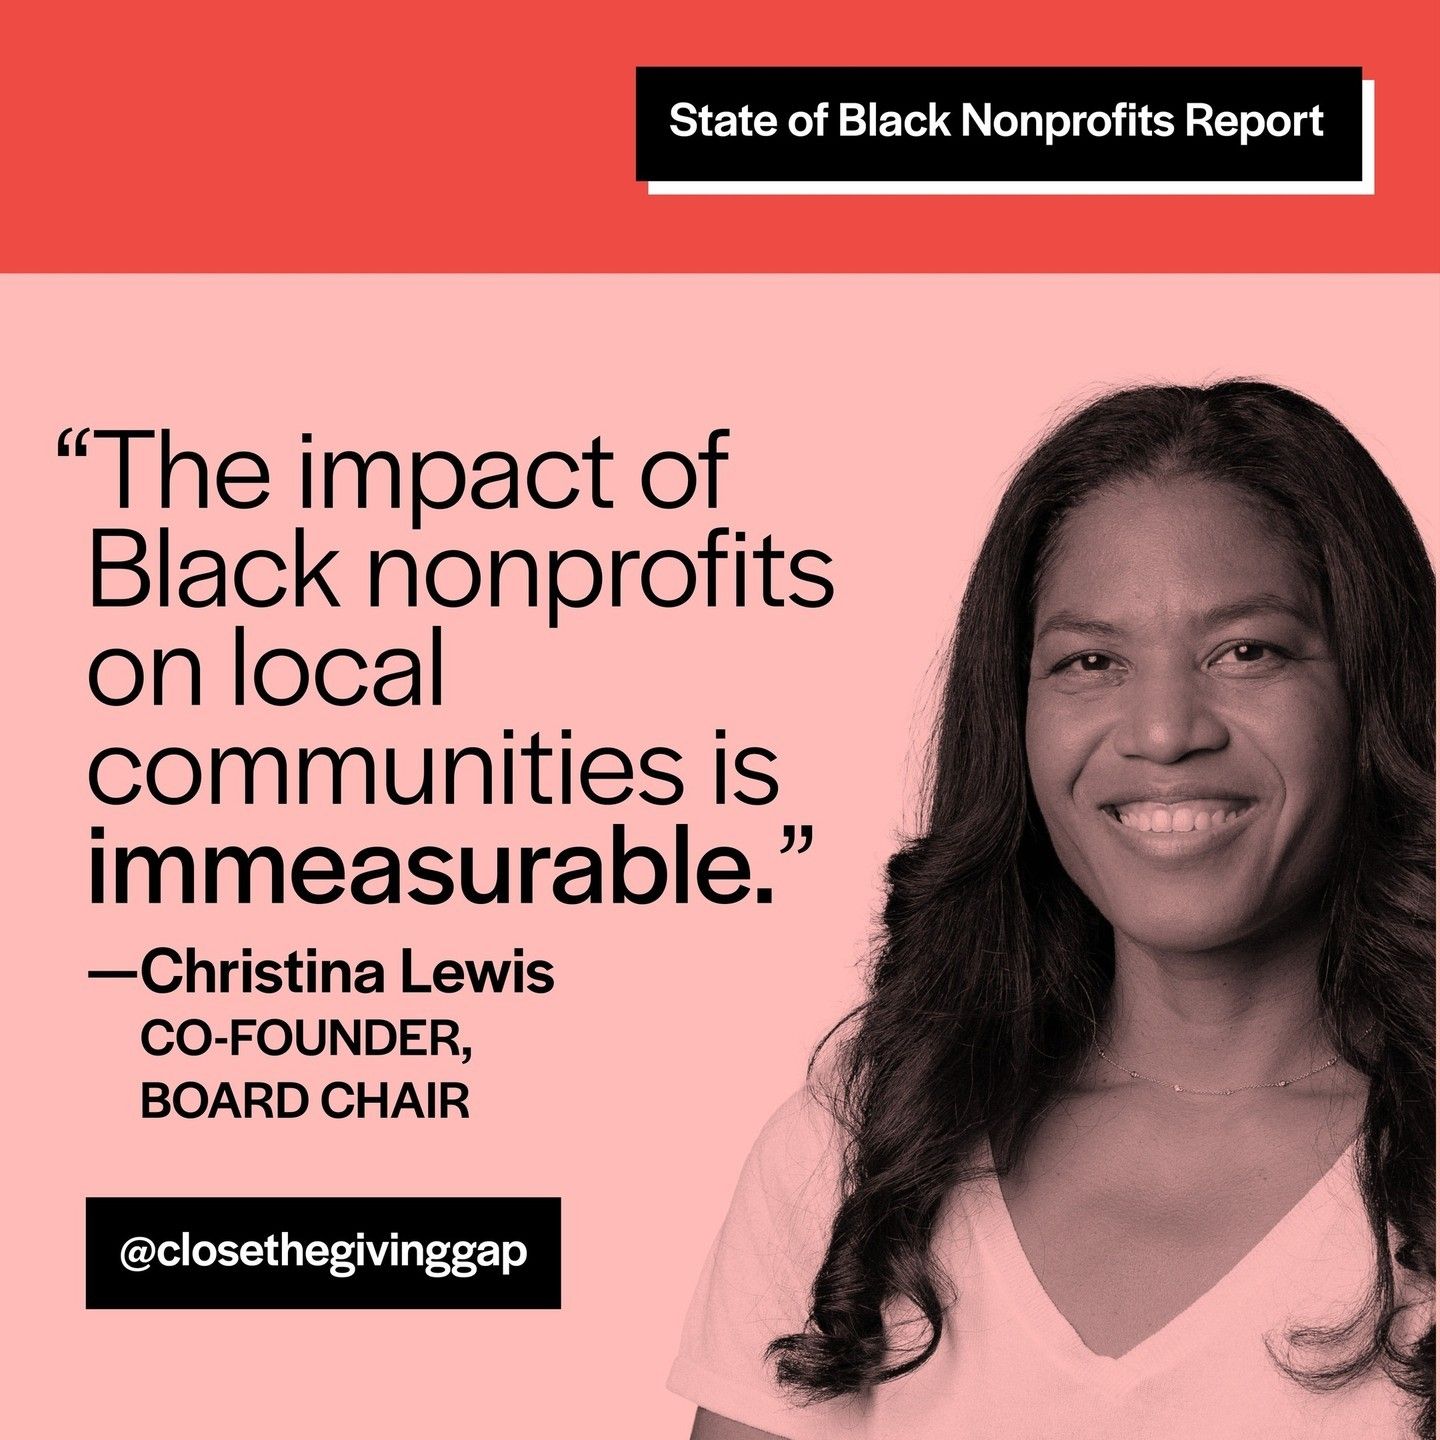 &quot;The impact of Black nonprofits on local communities is immeasurable,&quot; said Christina Lewis, Giving Gap co-founder and board chair. &quot;This report spotlights the need to increase investment in Black nonprofits that are empowering communities and are at the forefront of racial equity and justice work.&quot;